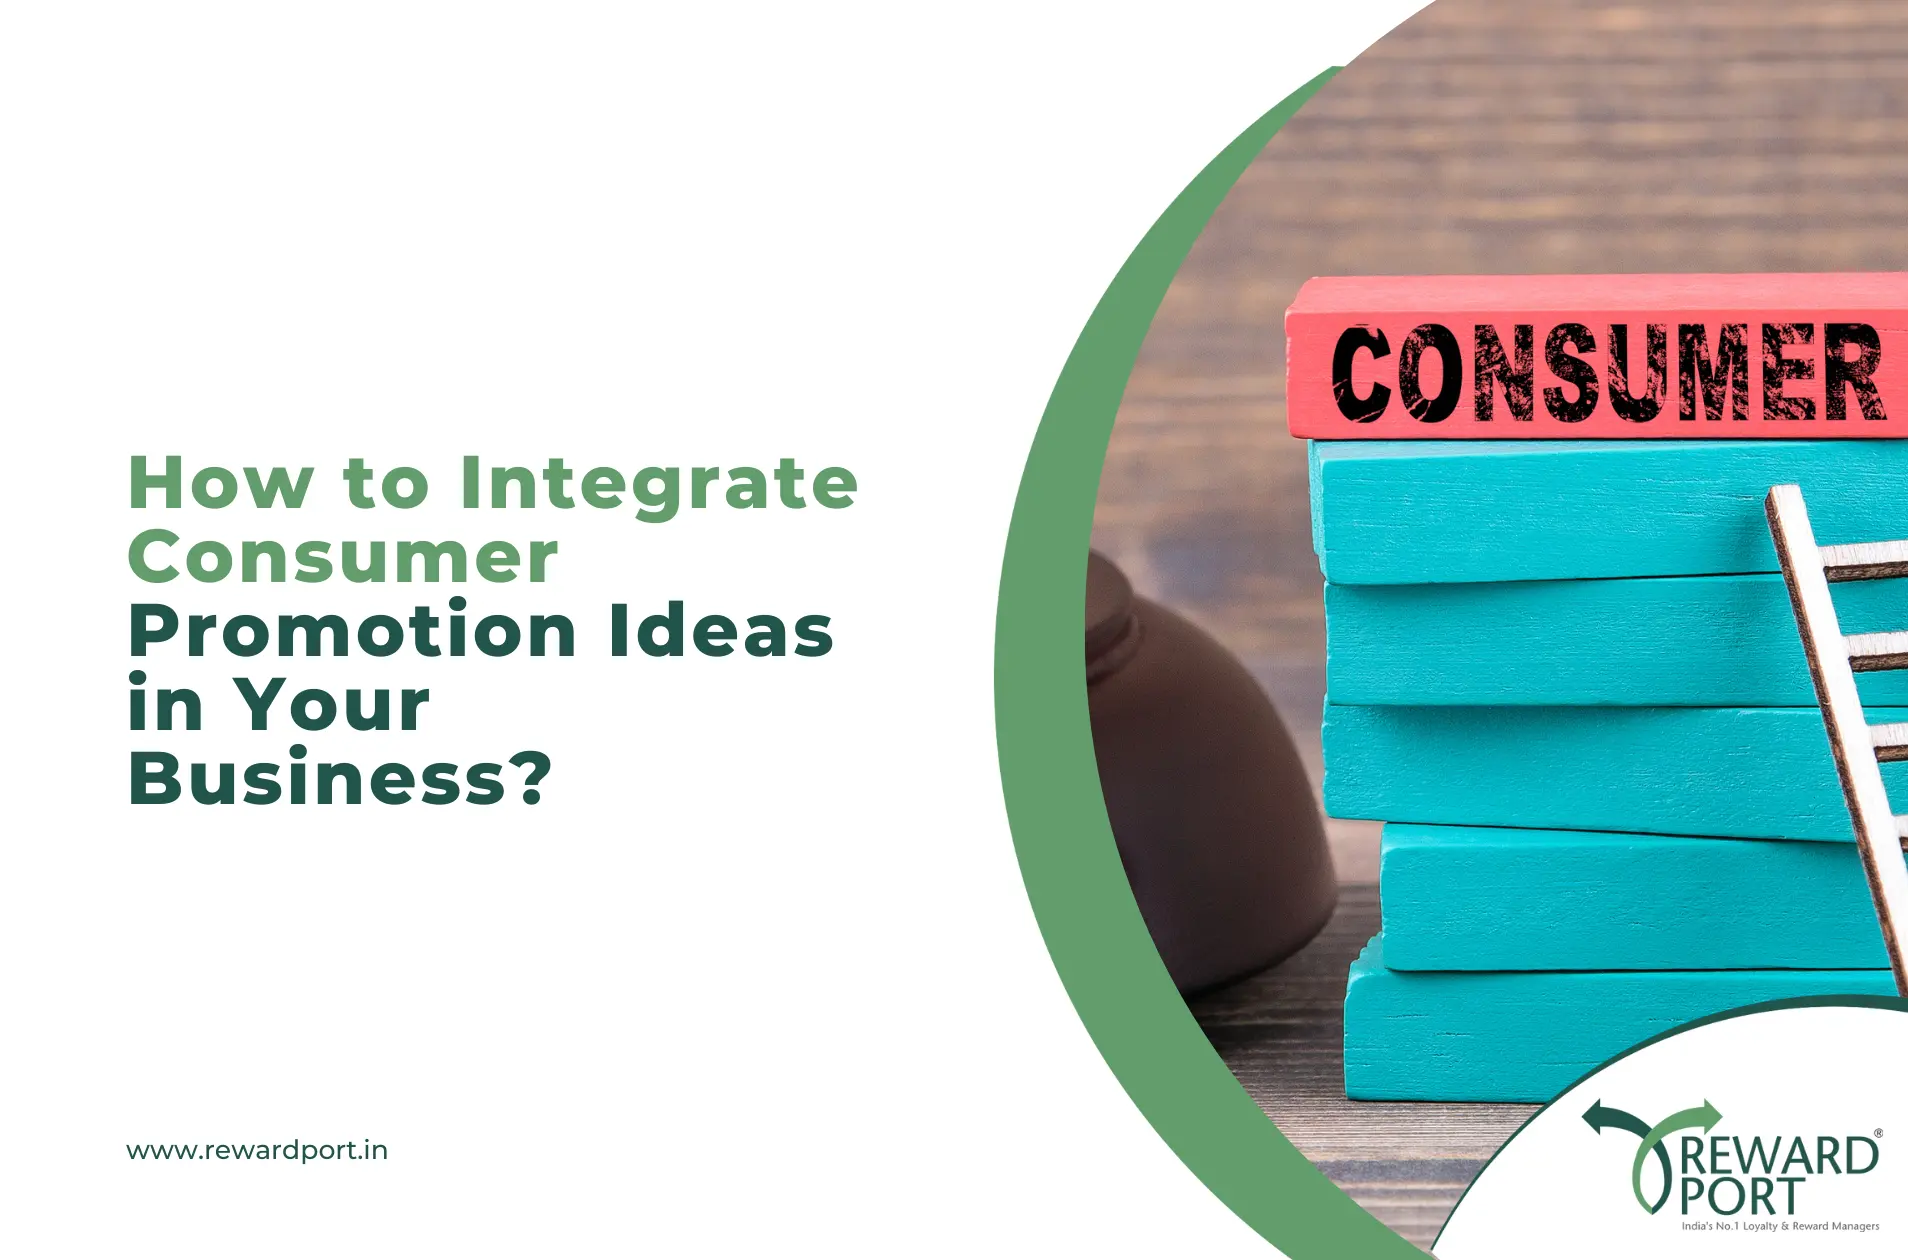 How to Integrate Consumer Promotion Ideas in Your Business?